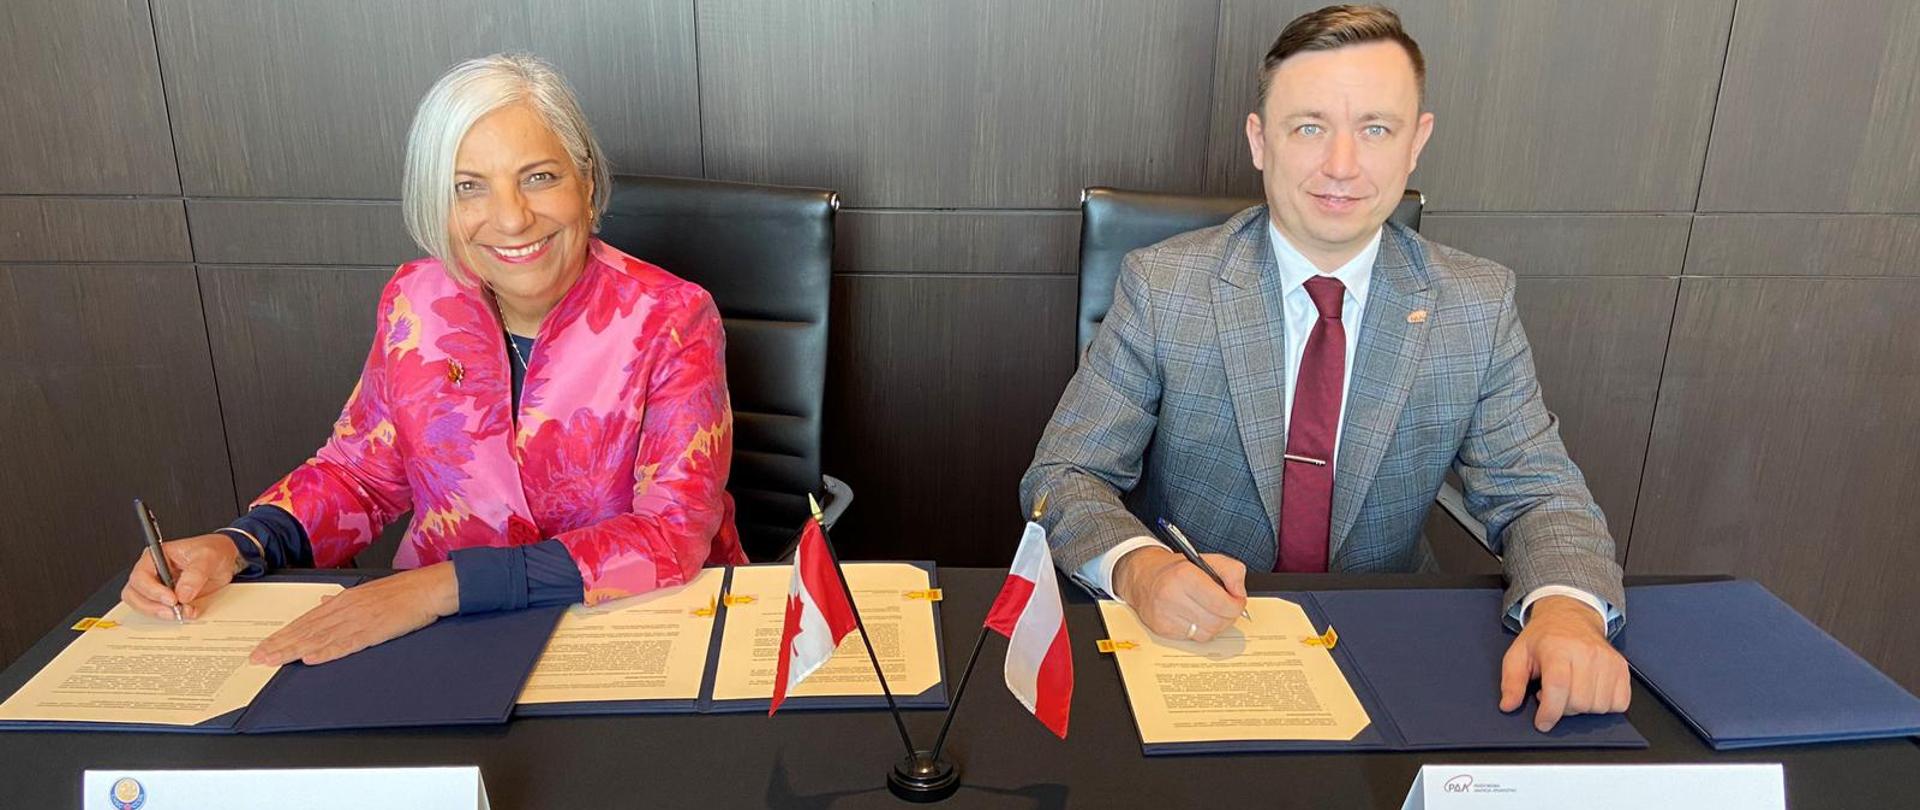 The agreement on further cooperation between Poland and Canada in the field of nuclear safety was signed by Andrzej Głowacki, acting President of the PAA (right), and Rumina Velshi, Chairwoman of the Canadian Nuclear Safety Commission (left)